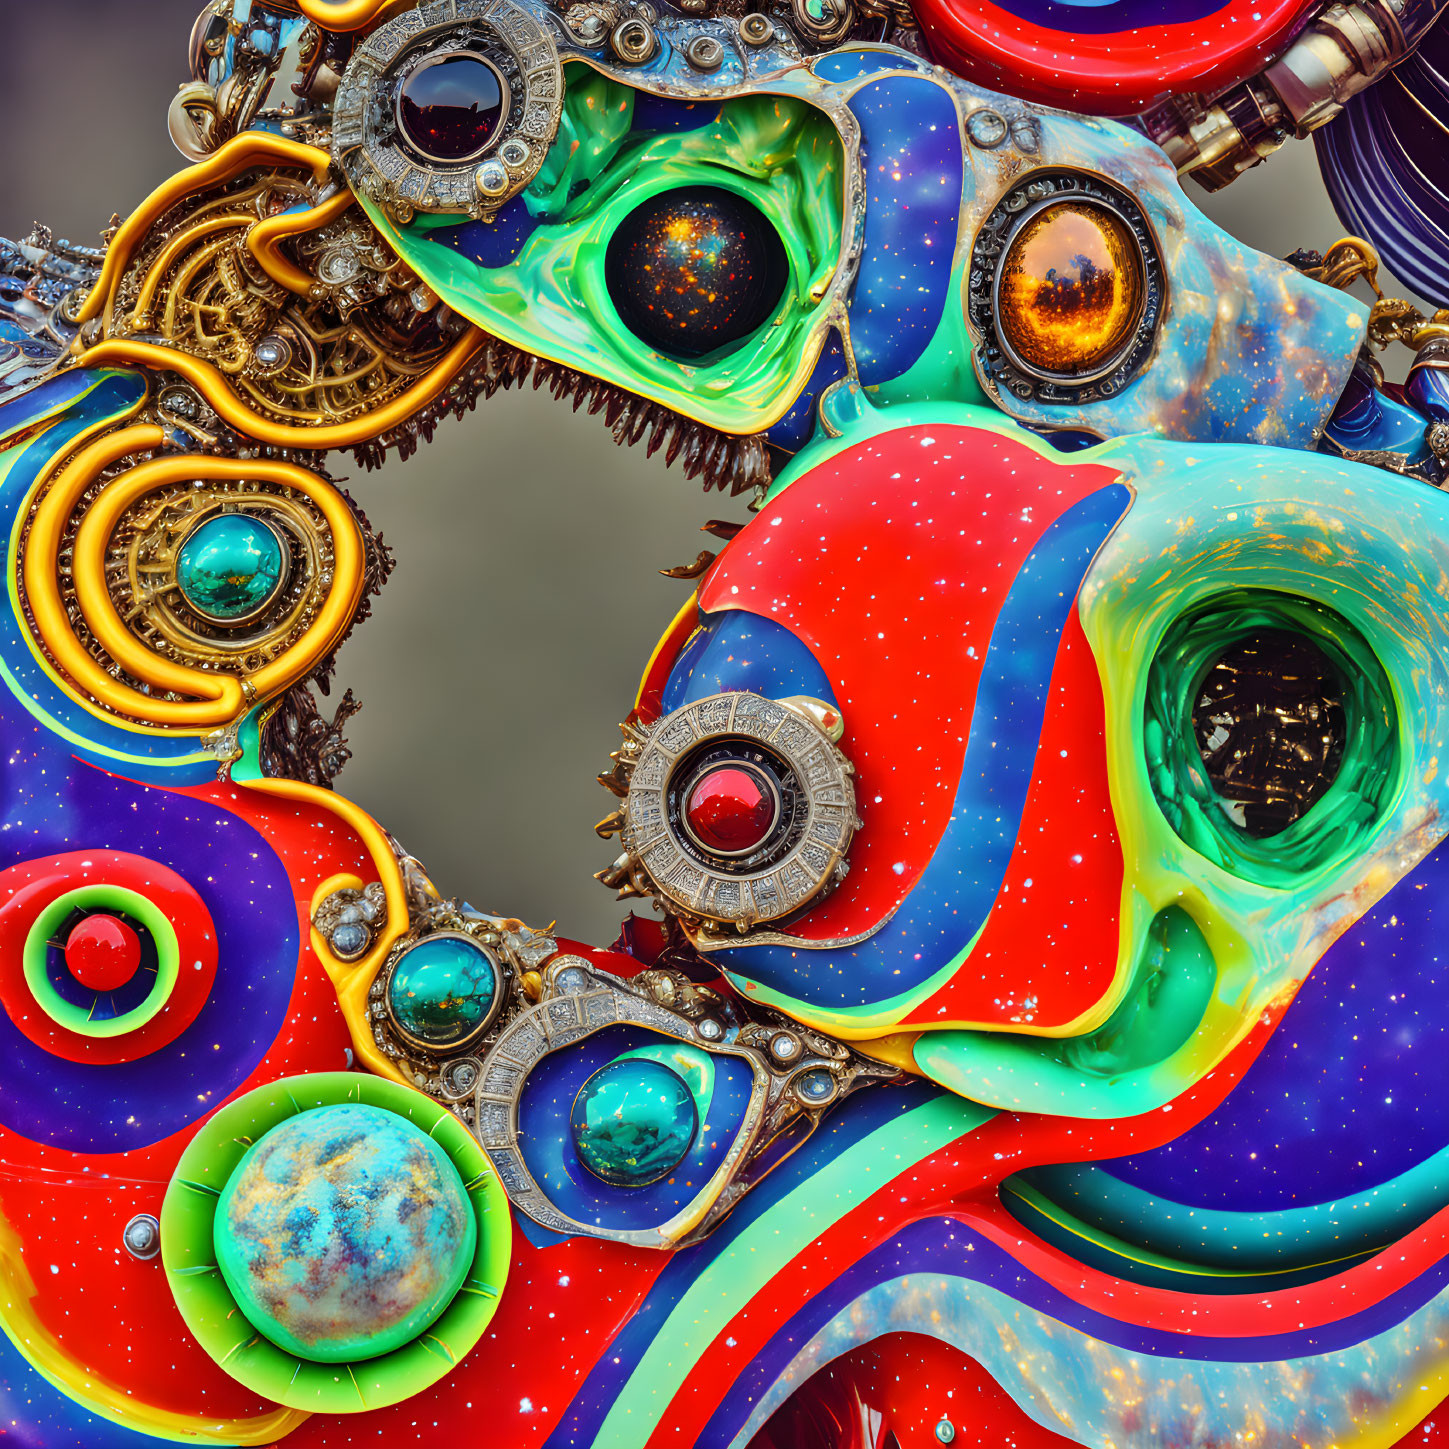 Abstract Psychedelic Fusion of Mechanical Gears and Organic Shapes